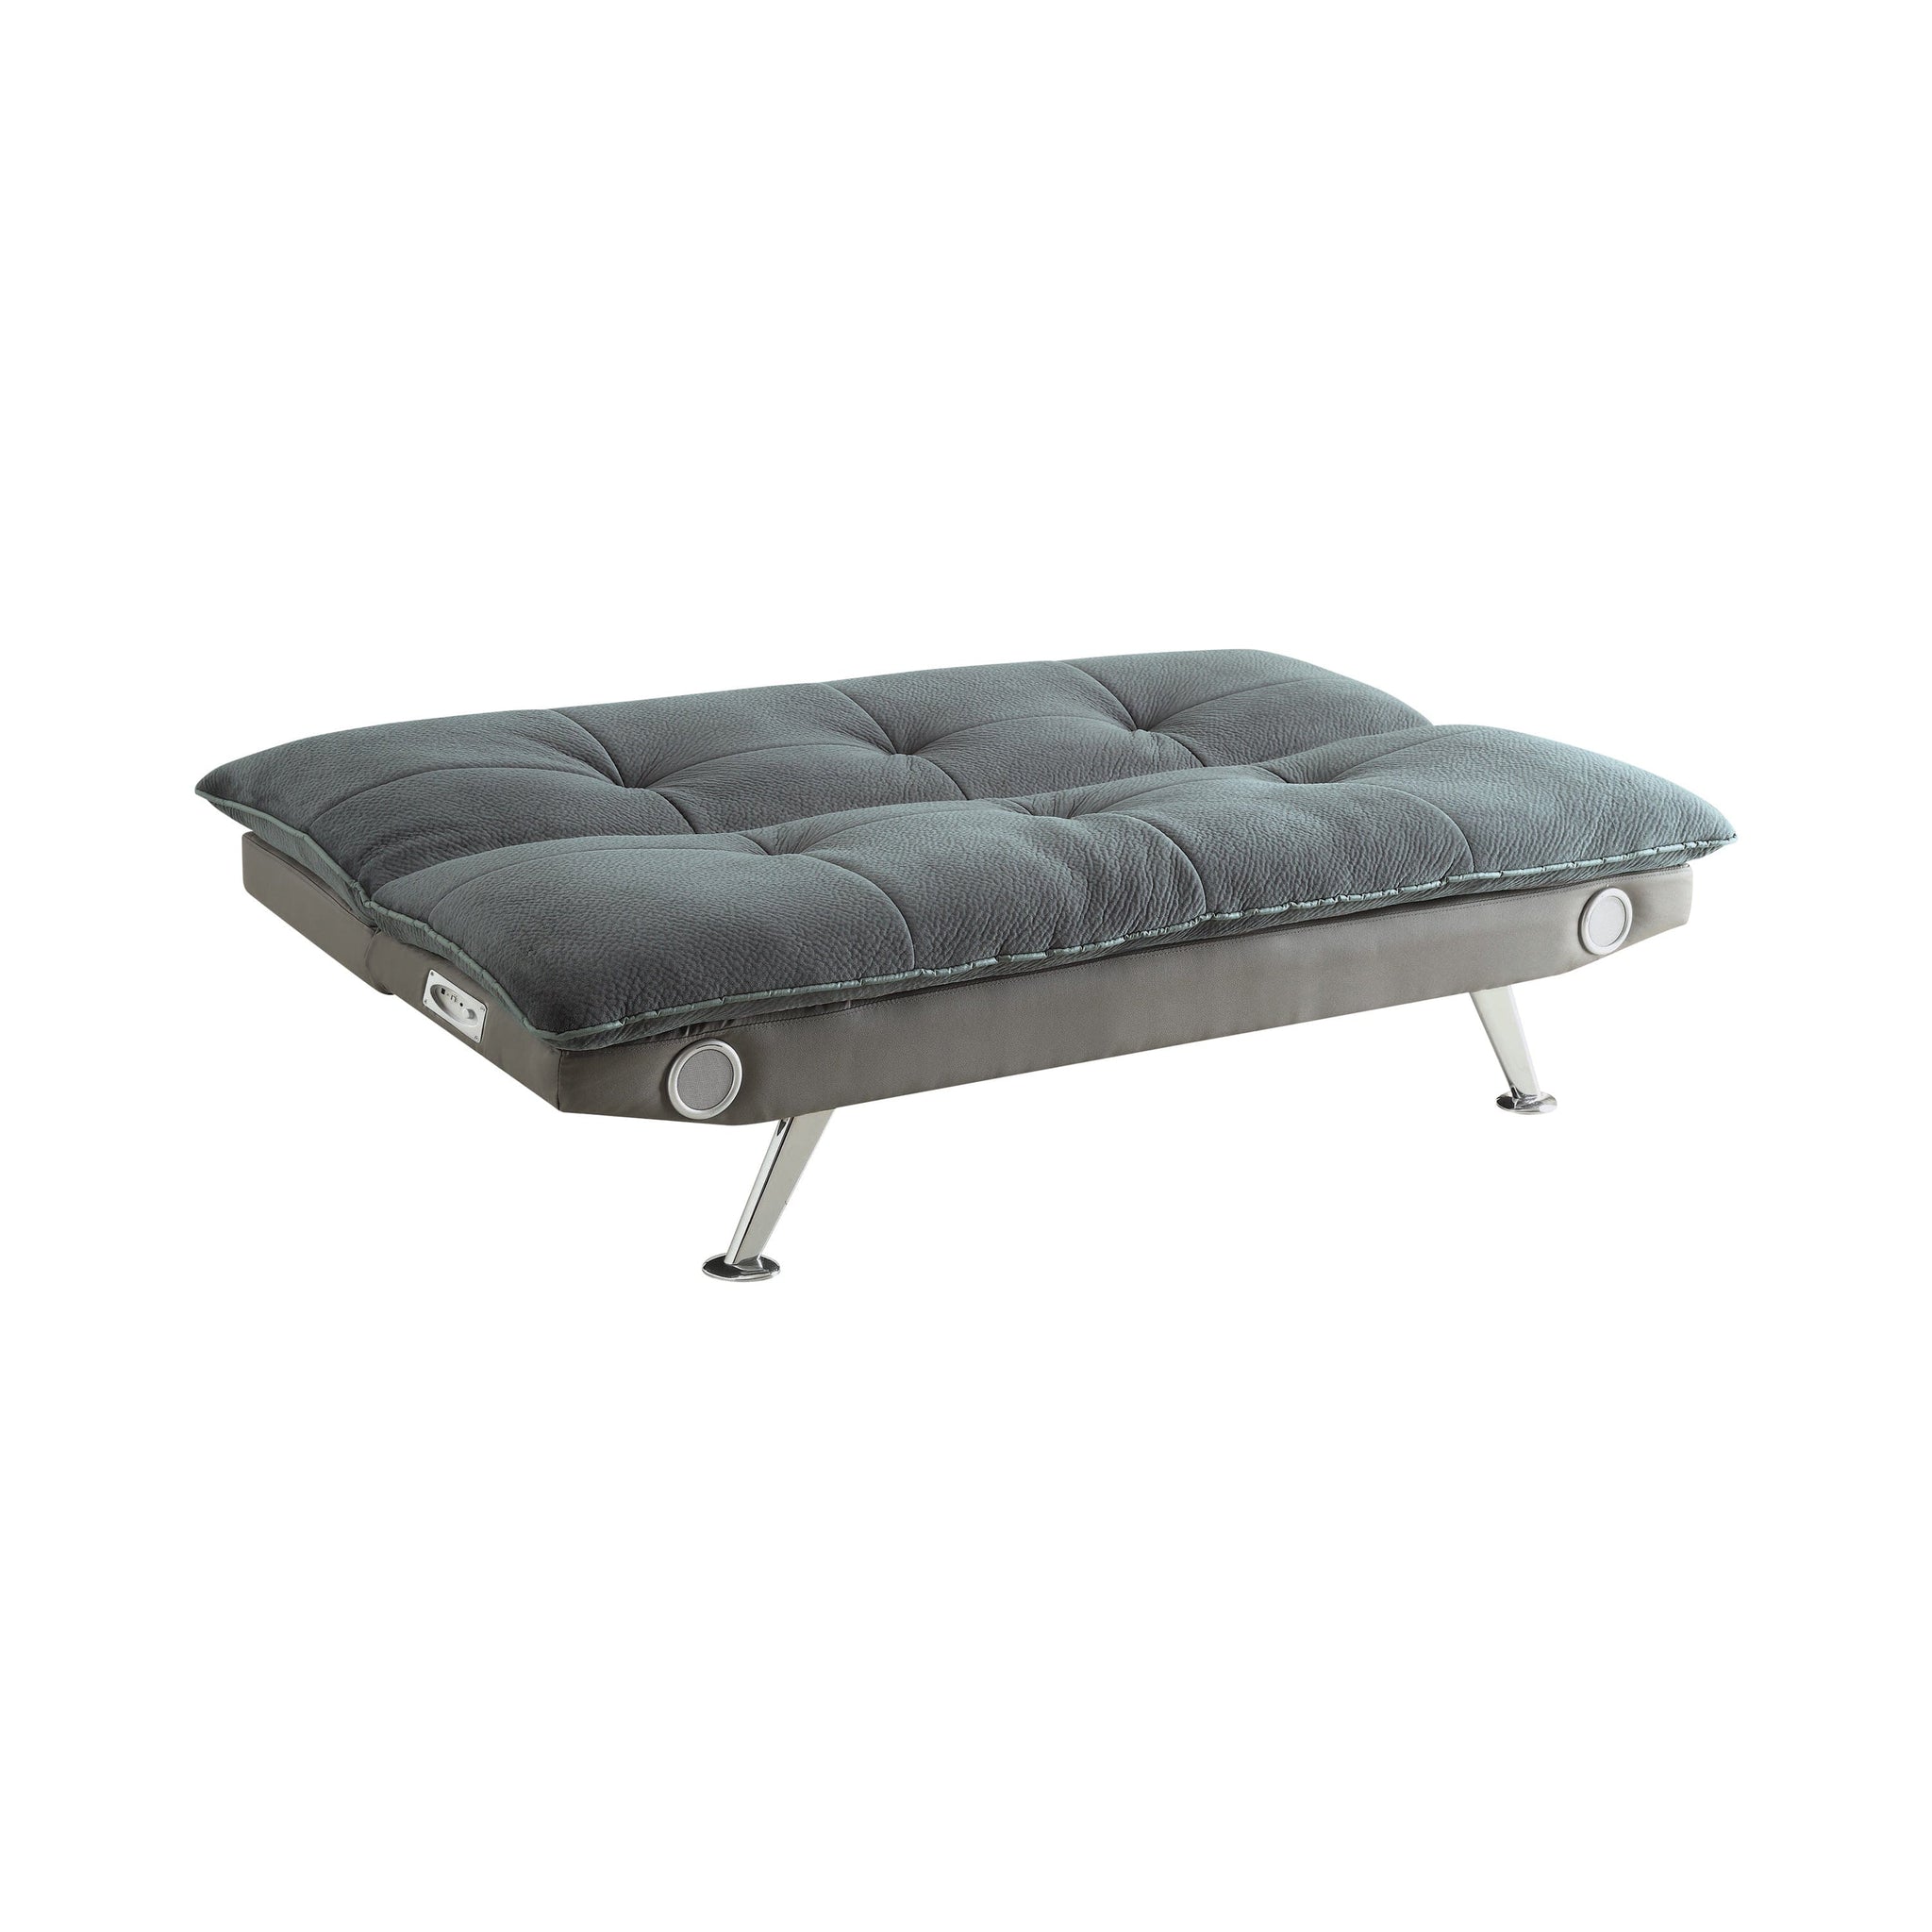 Odel Upholstered Sofa Bed With Bluetooth Speakers Grey Collection: Odel SKU: 500046